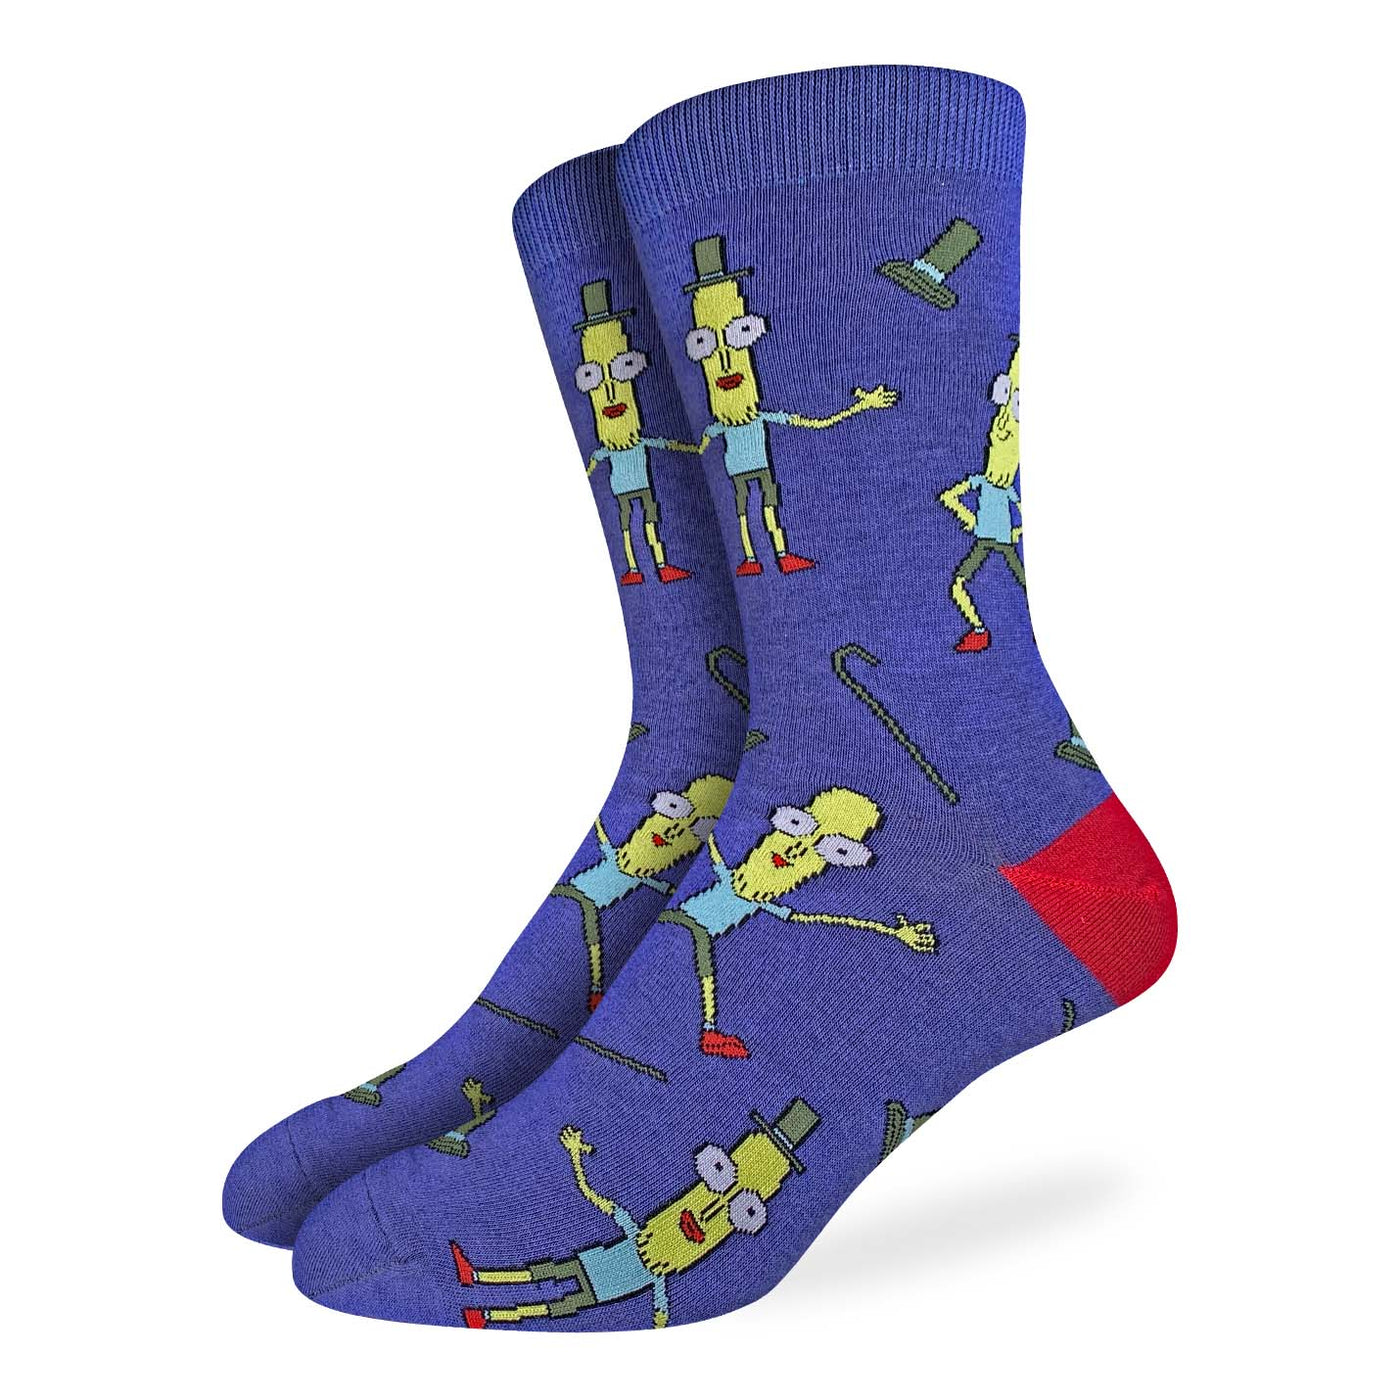 "Mr. Poopybutthole "Crew Socks by Good Luck Sock - Large - SALE